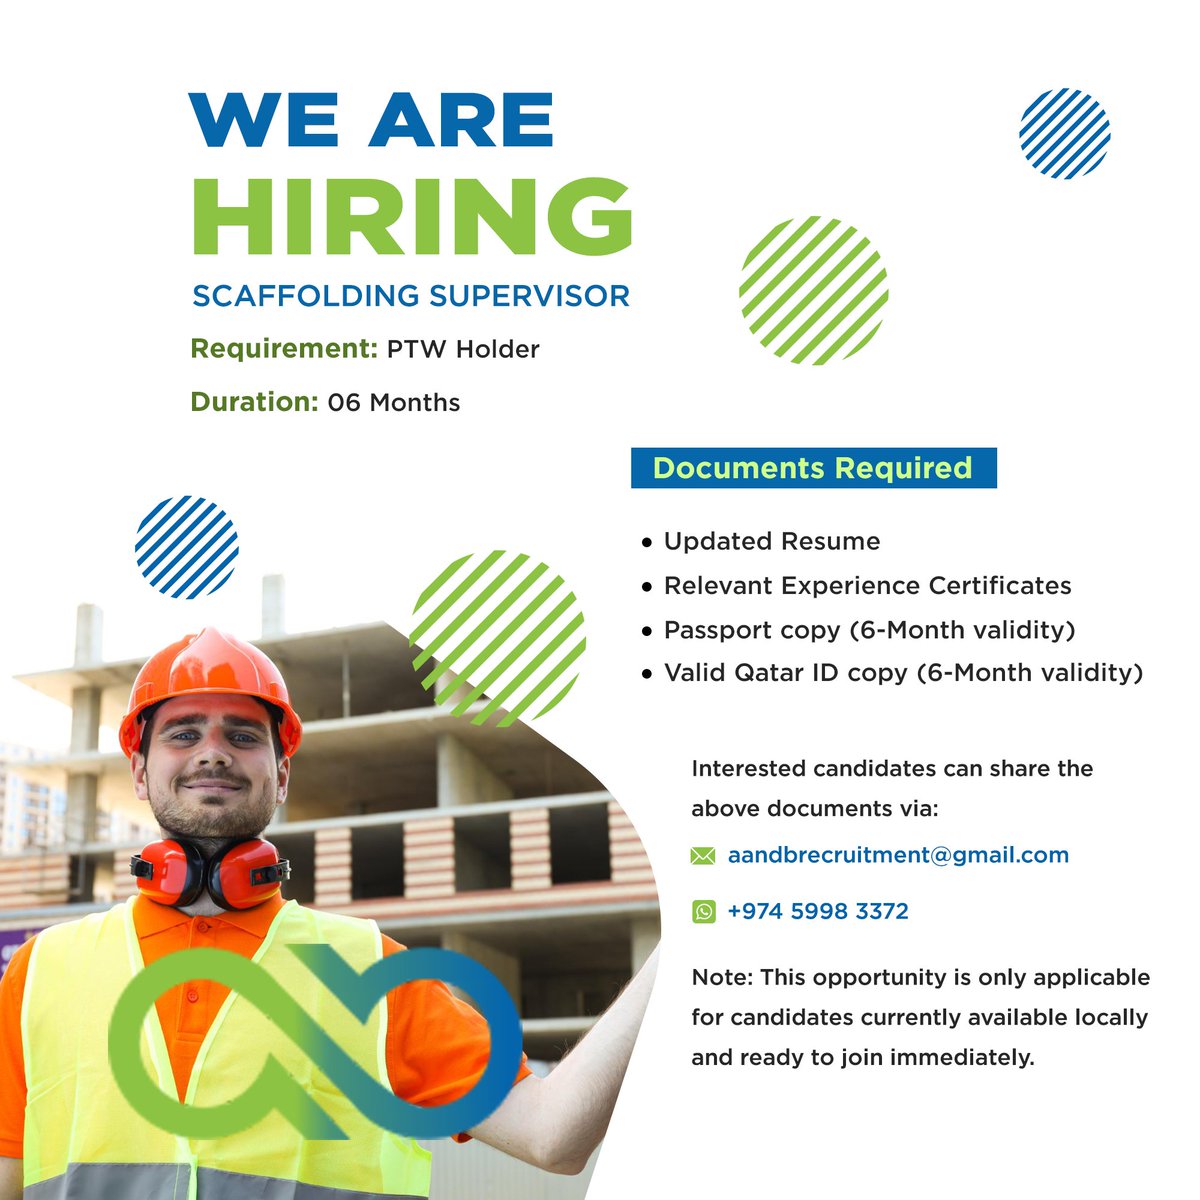 Open position for Scaffolding Supervisor role in Qatar. To apply, send your resume to aandbrecruitment@gmail.com or contact +974 - 50270393  

#AandBprojects #Qatar #Oil #Doha_quatar #TechInnovation #materials